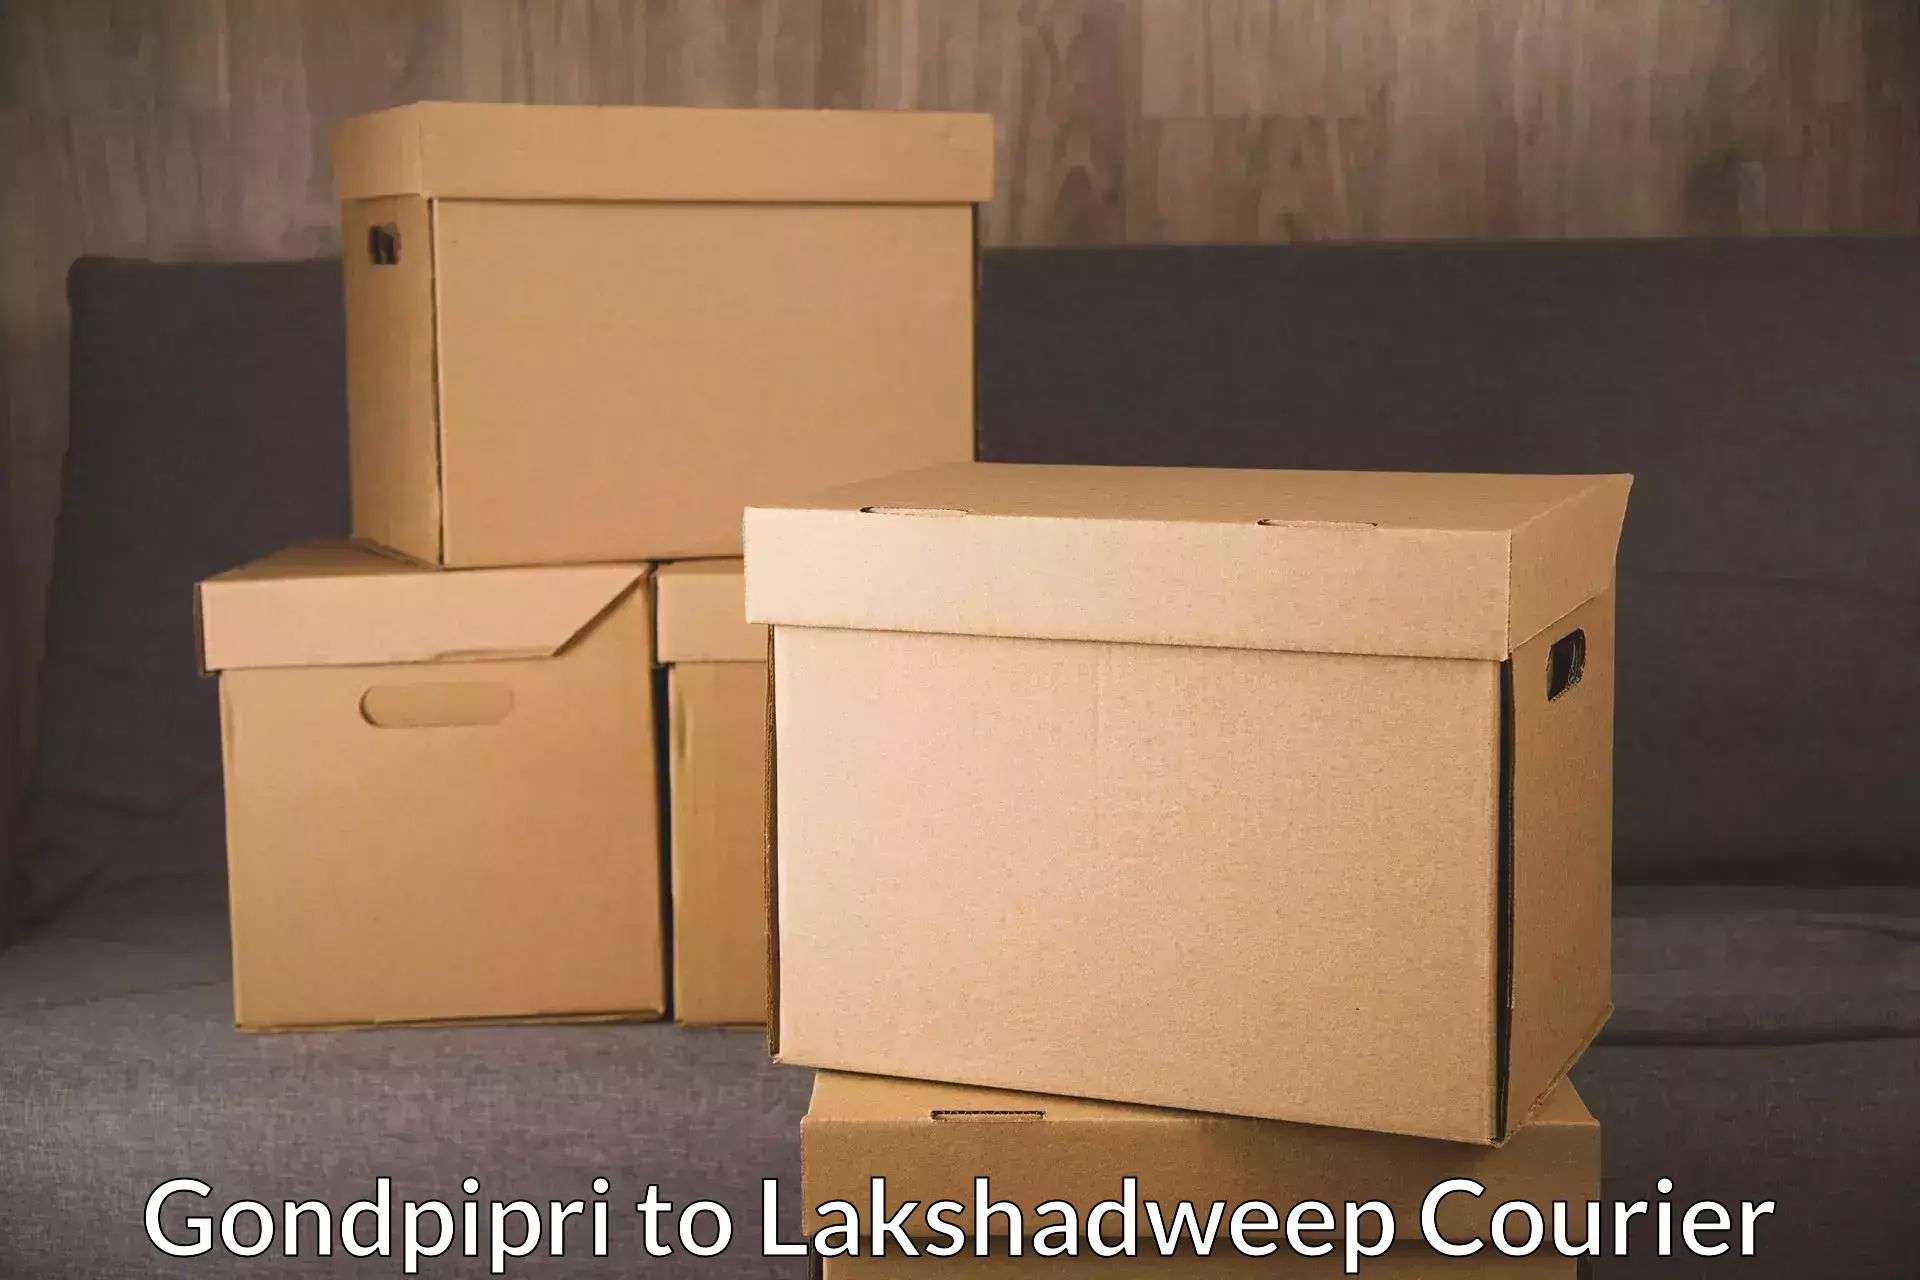 Round-the-clock parcel delivery in Gondpipri to Lakshadweep